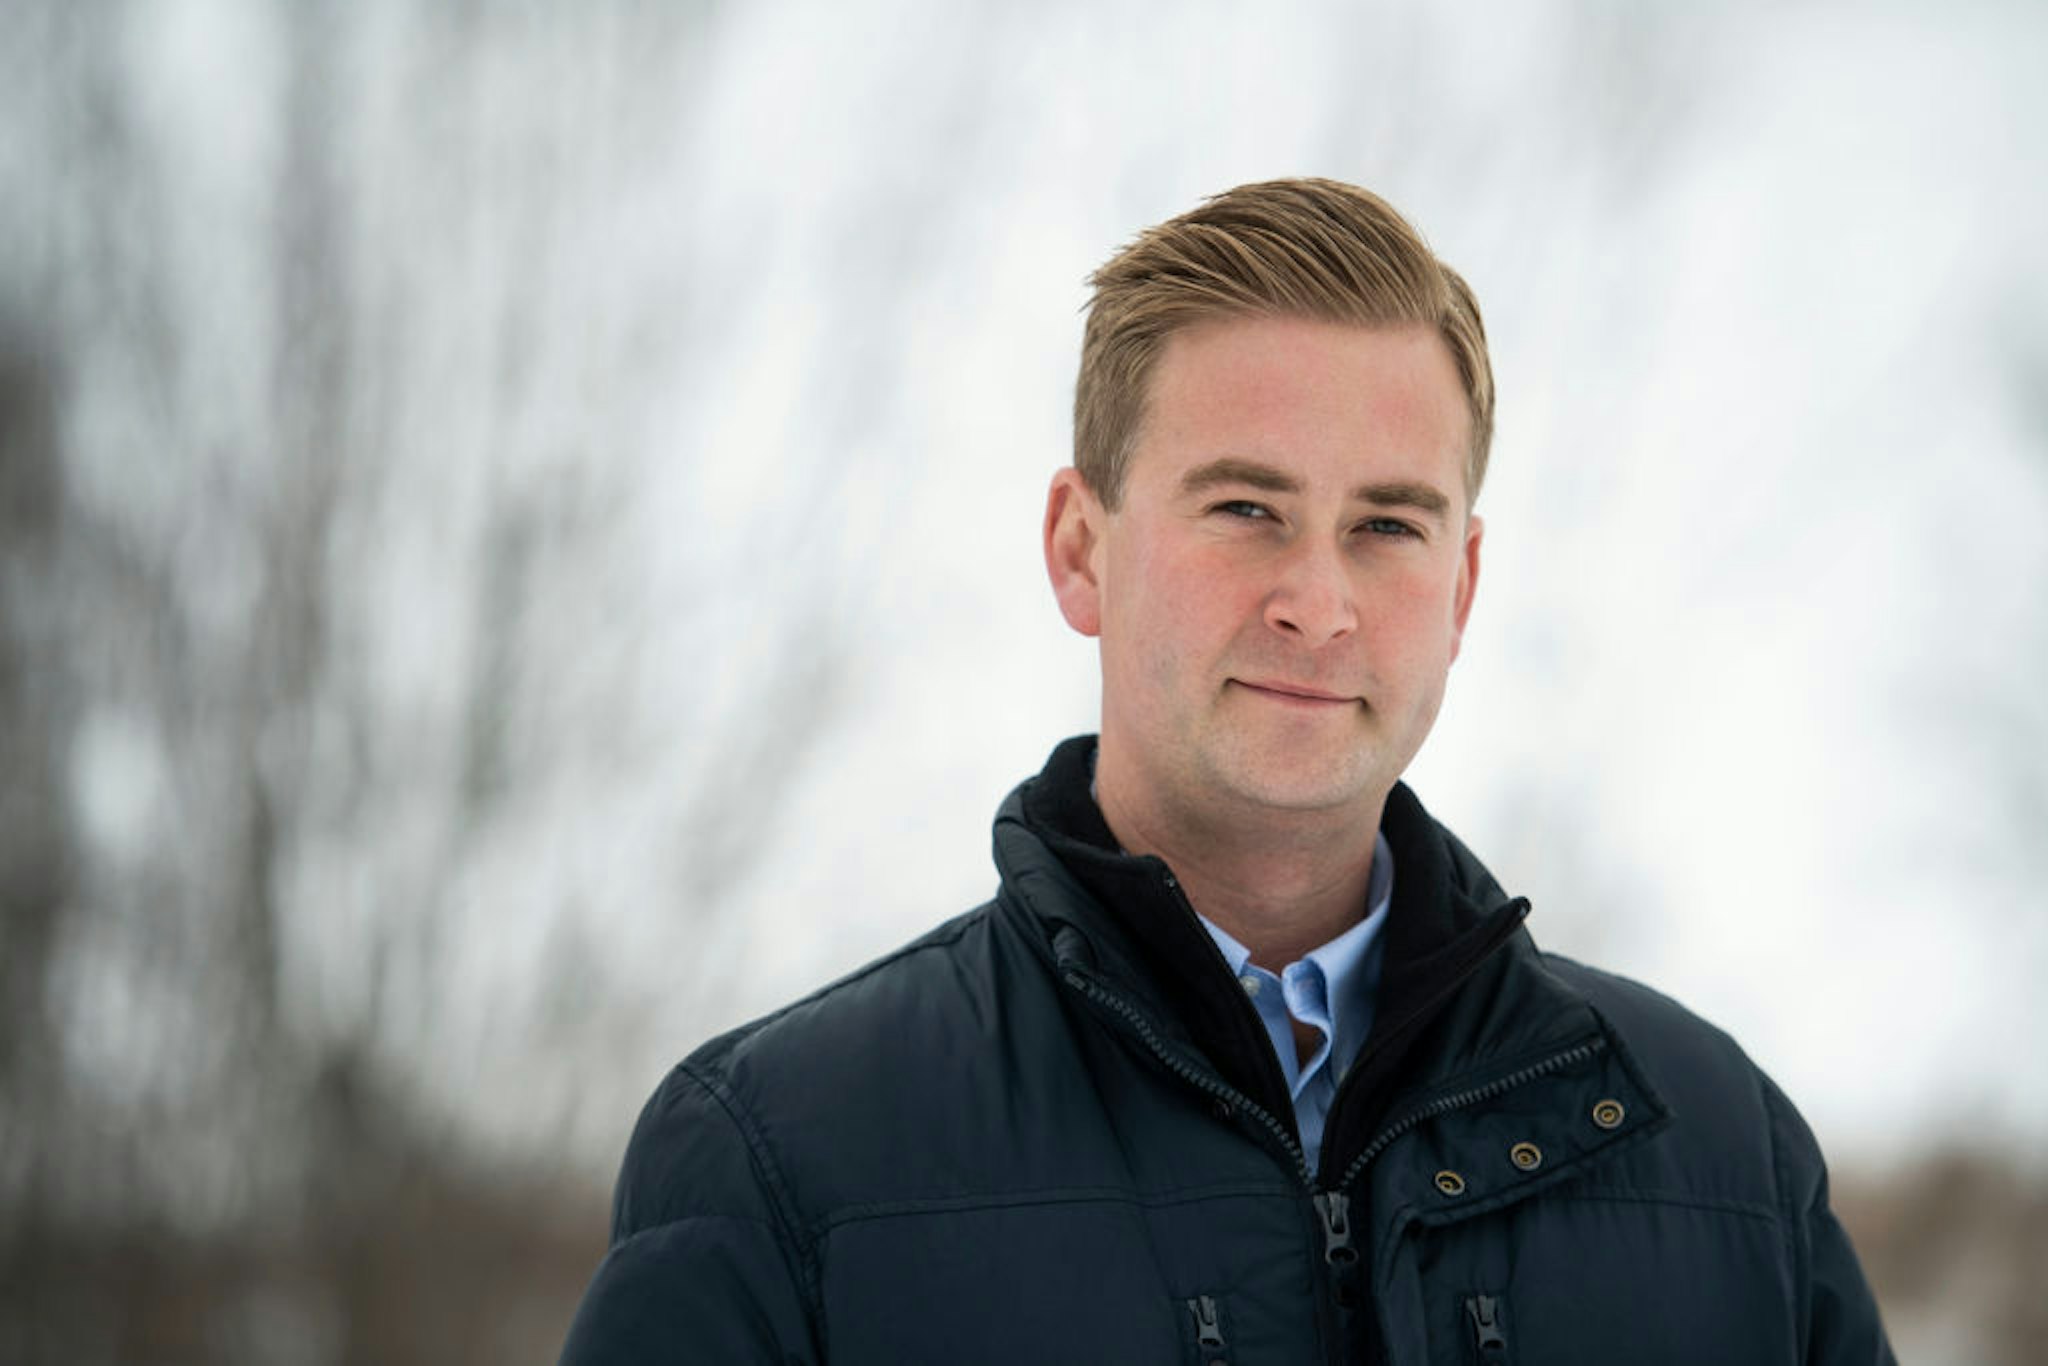 DAVENPORT, IOWA - JANUARY 28: Peter Doocy, a Fox News reporter, stands for a portrait before a campaign event for former vice president Joe Biden at Jeno's Little Hungary in Davenport, IA on January 28, 2020. (Photo by Carolyn Van Houten/The Washington Post via Getty Images)